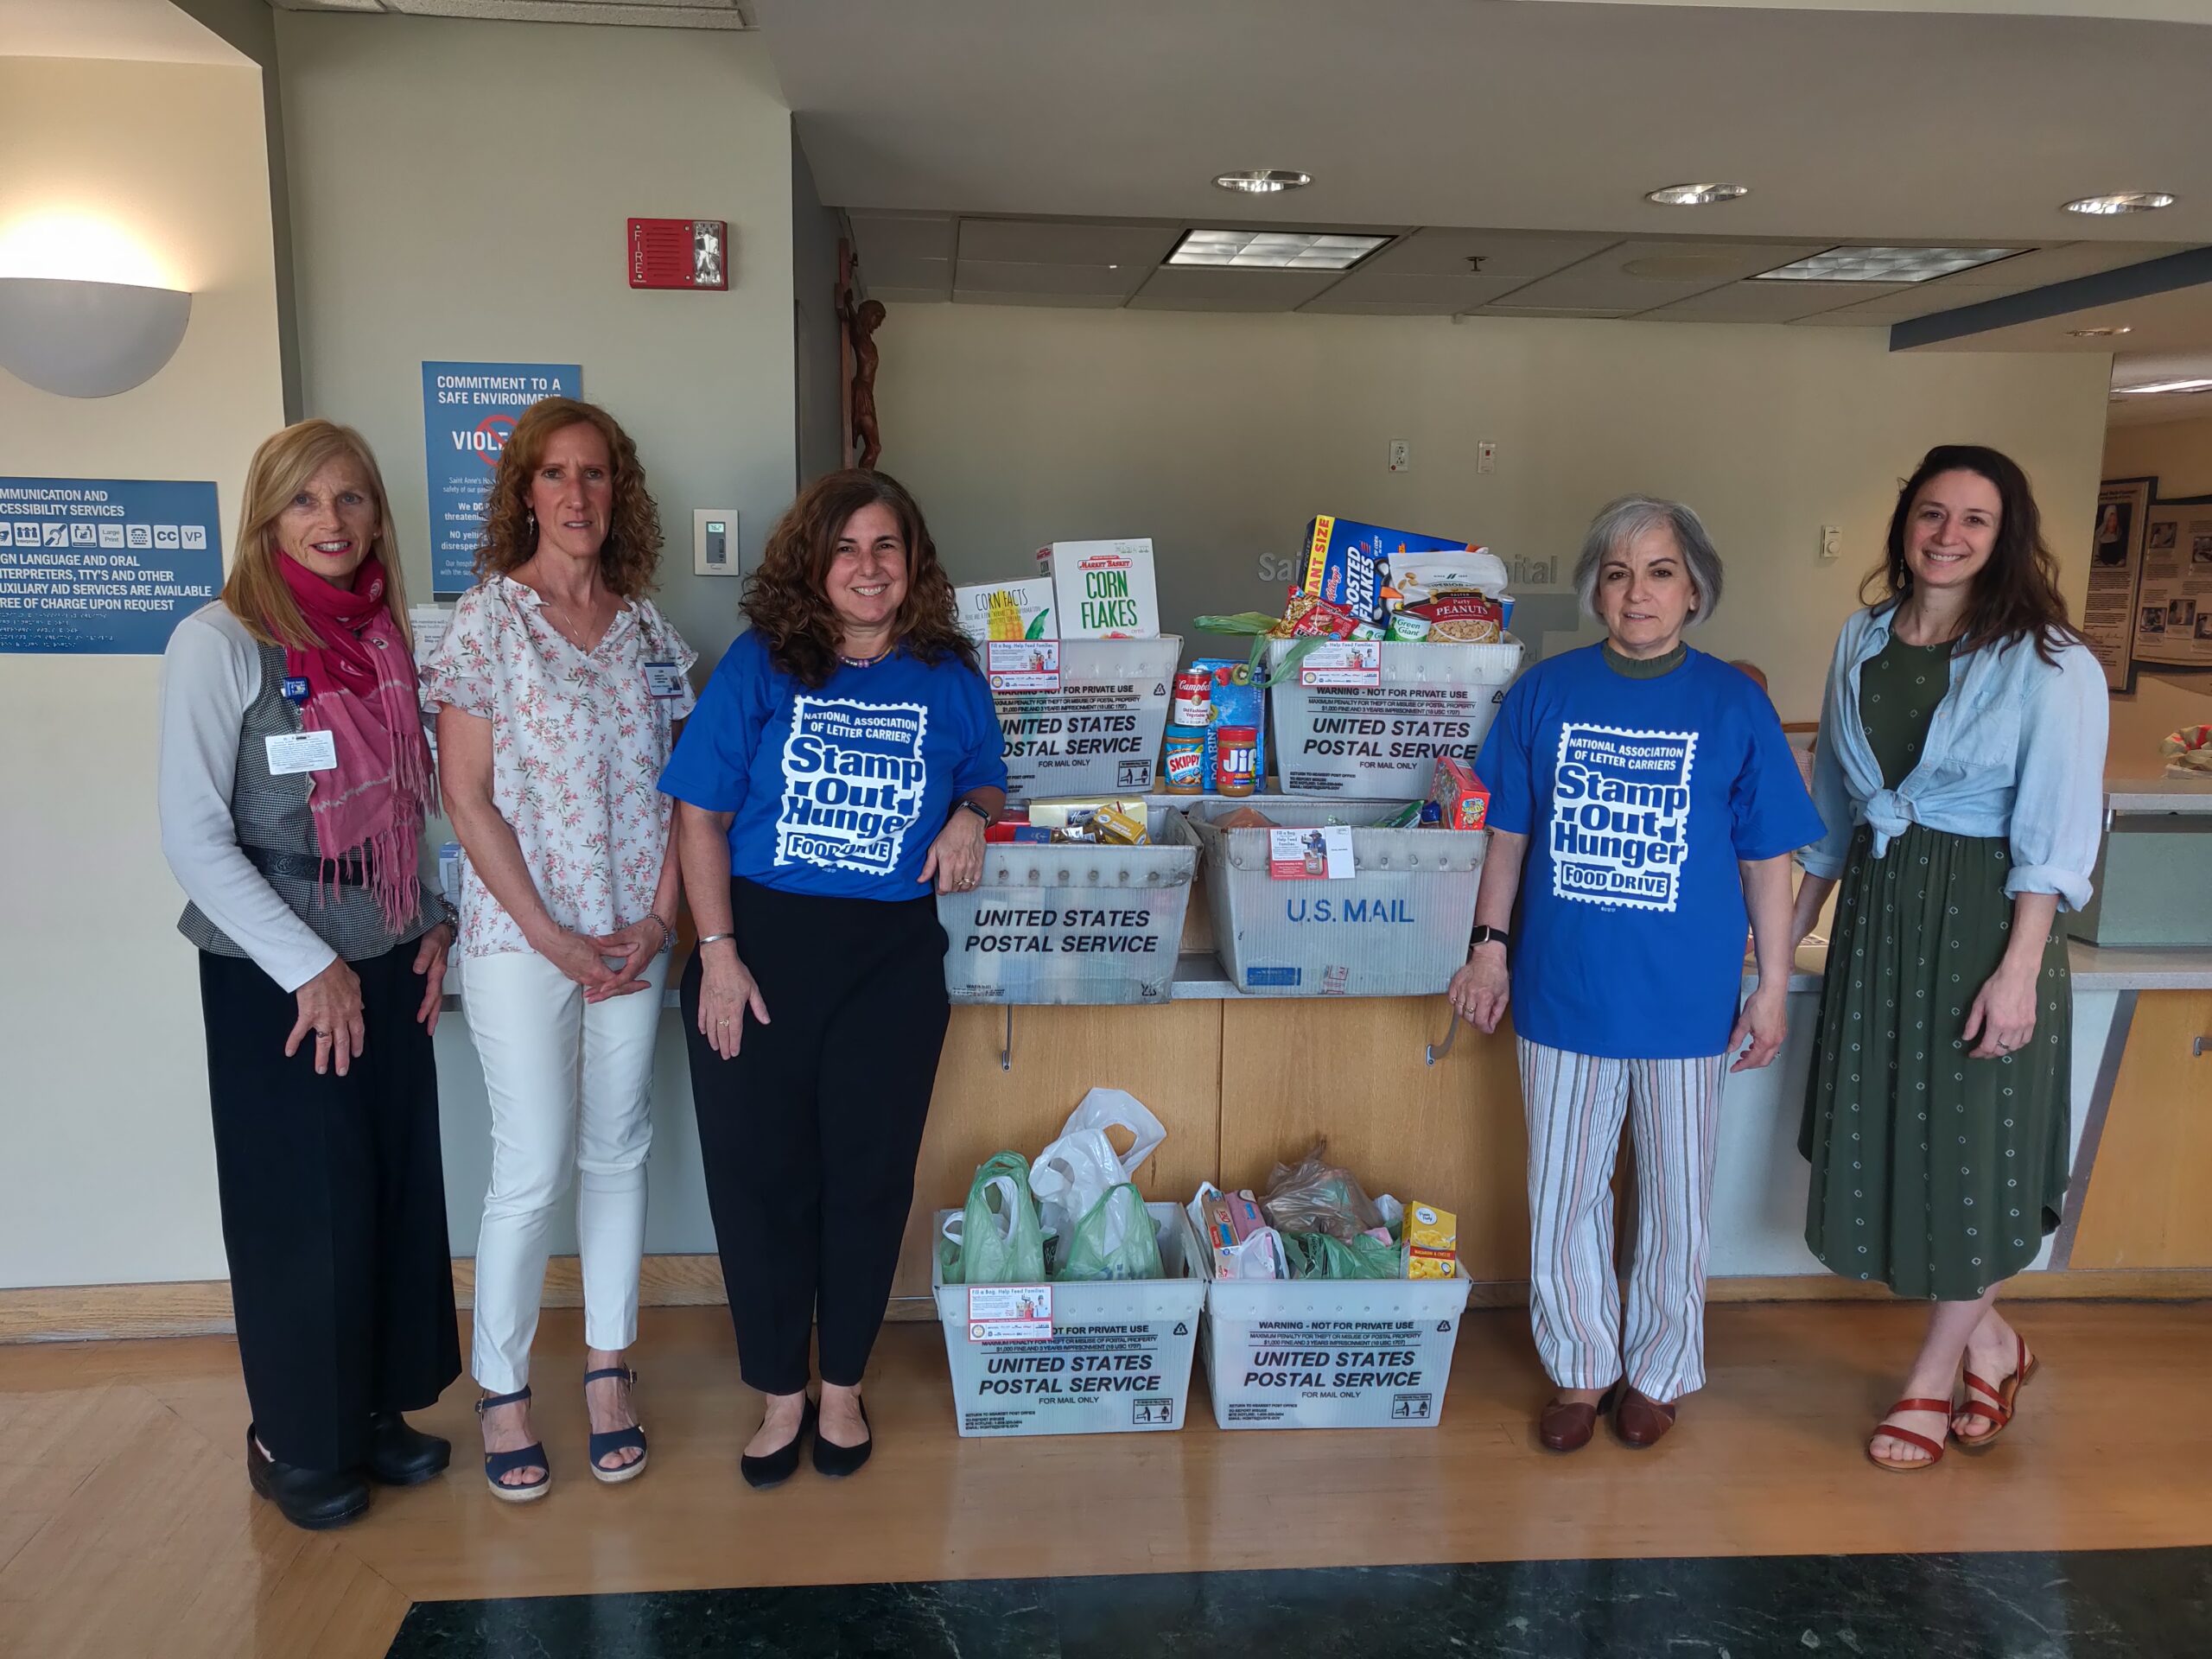 Saint Anne's Hospital employees pose with UWGFR employee next to donated food items in hospital lobby